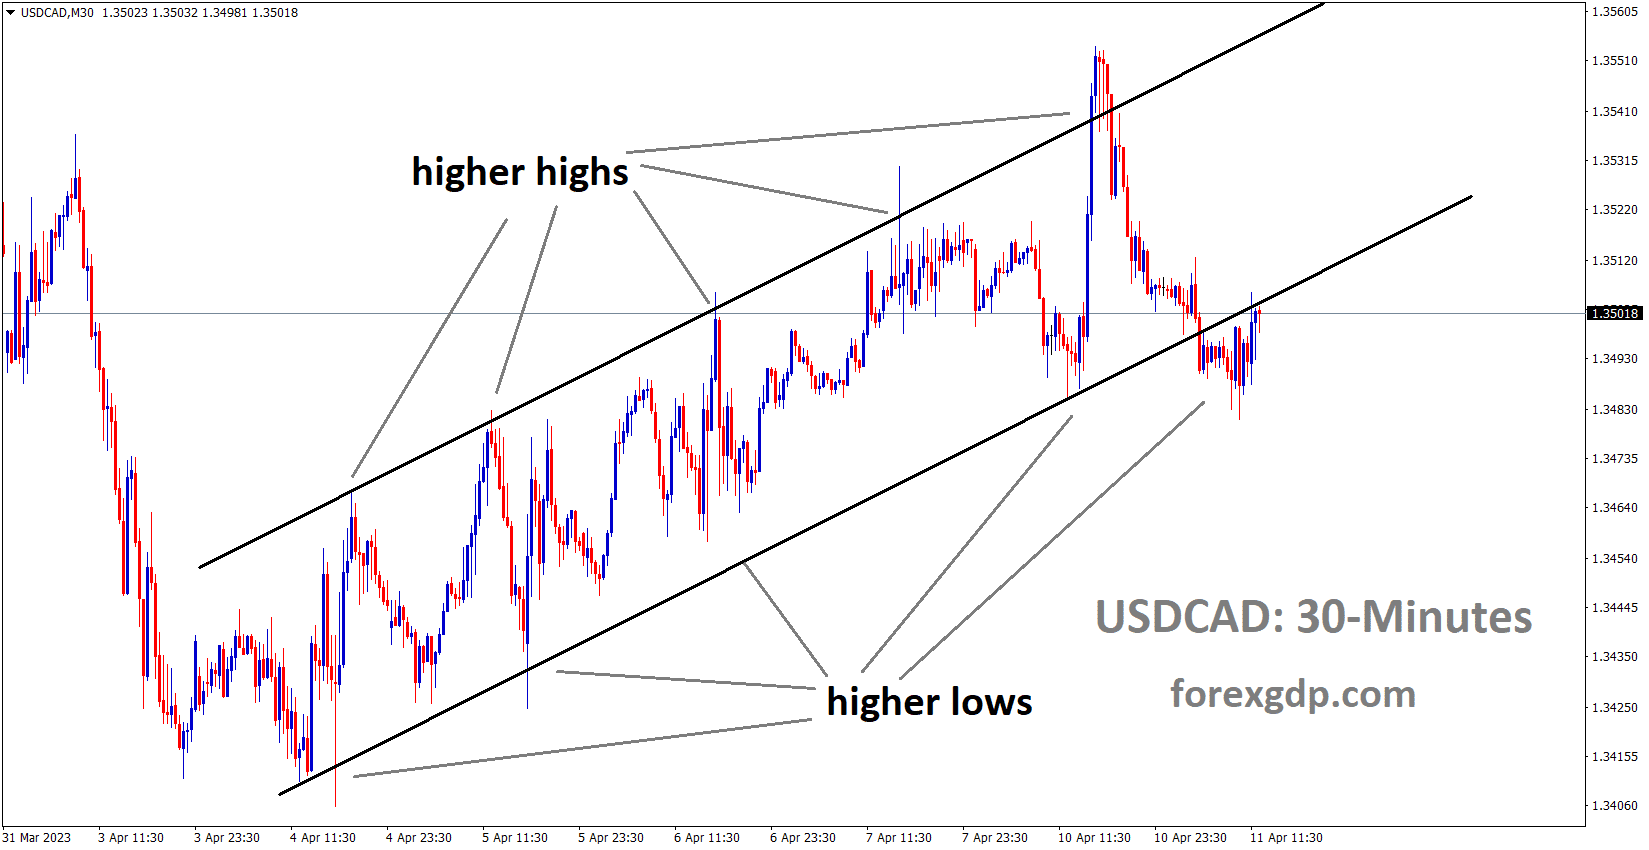 USDCAD is moving in an Ascending channel and the market has rebounded from the higher low area of the channel 2